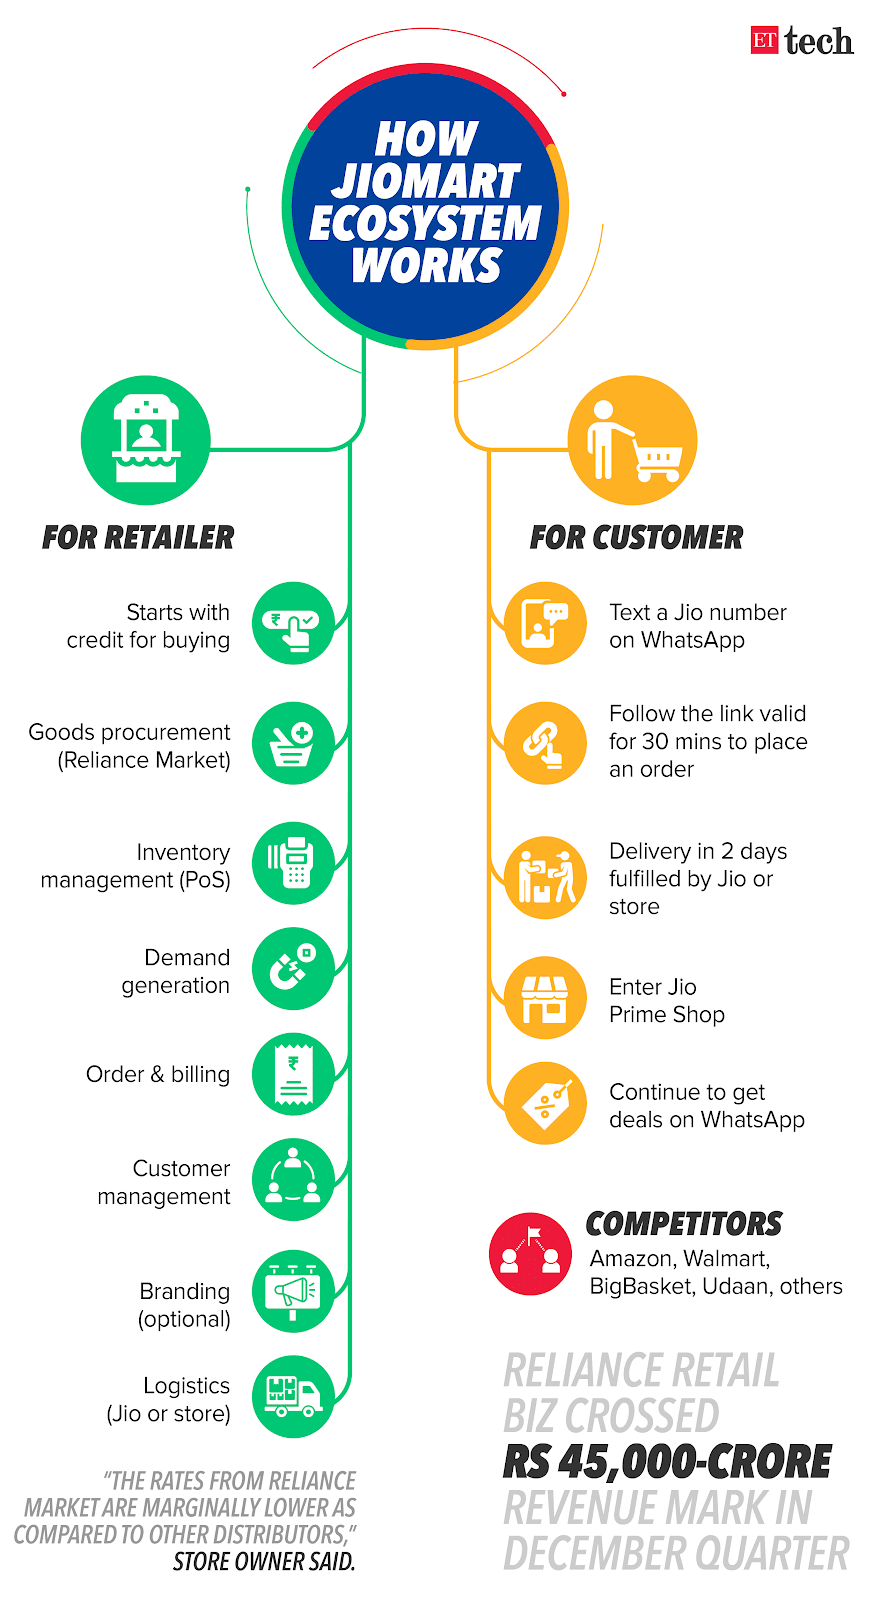 Presenting the working ecosystem of JioMart for two crucial segments i.e, retailers, and customers.